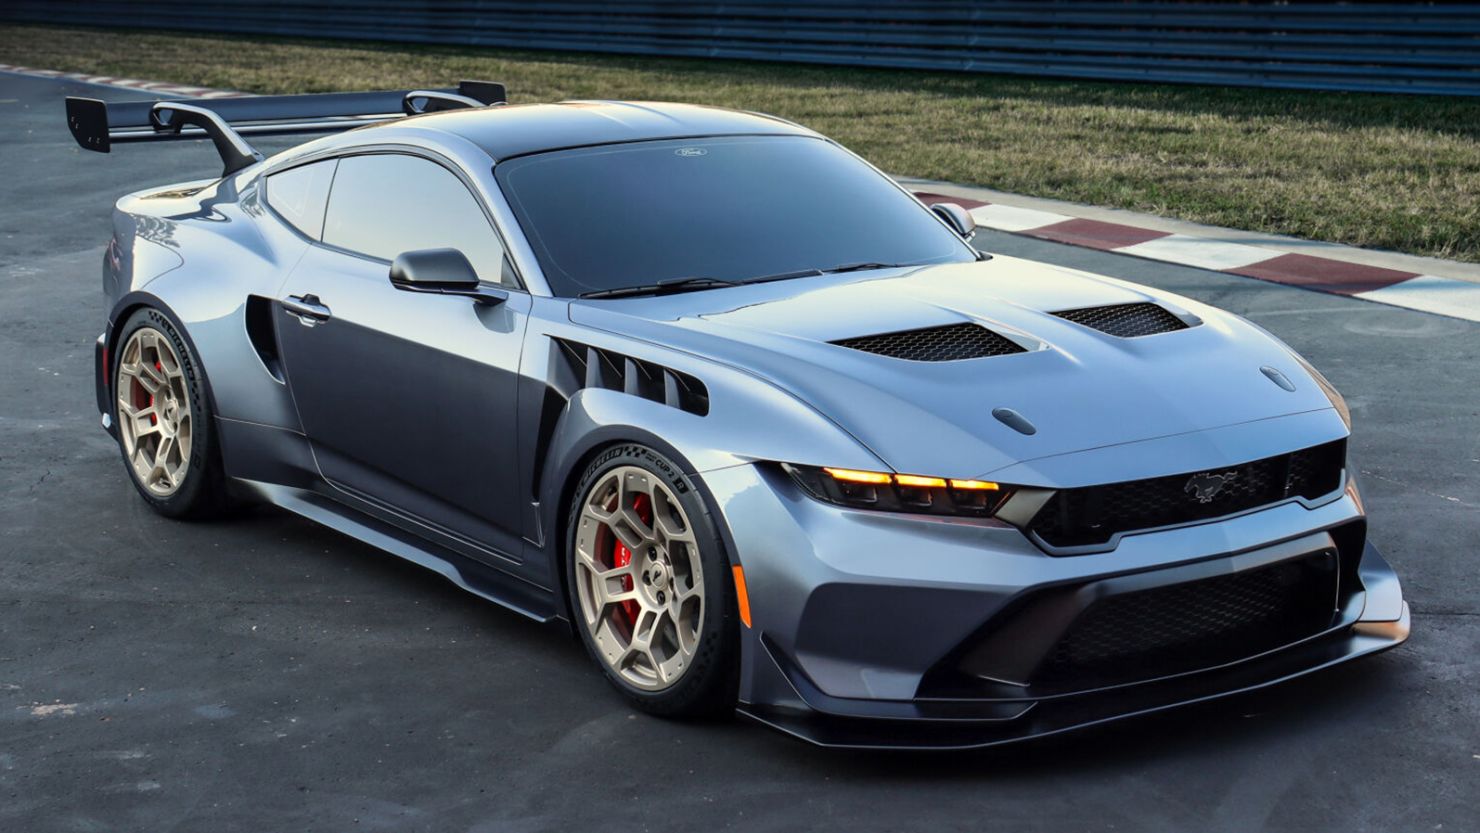 The Ford Mustang GTD promises supercar performance but with a price tag to match.